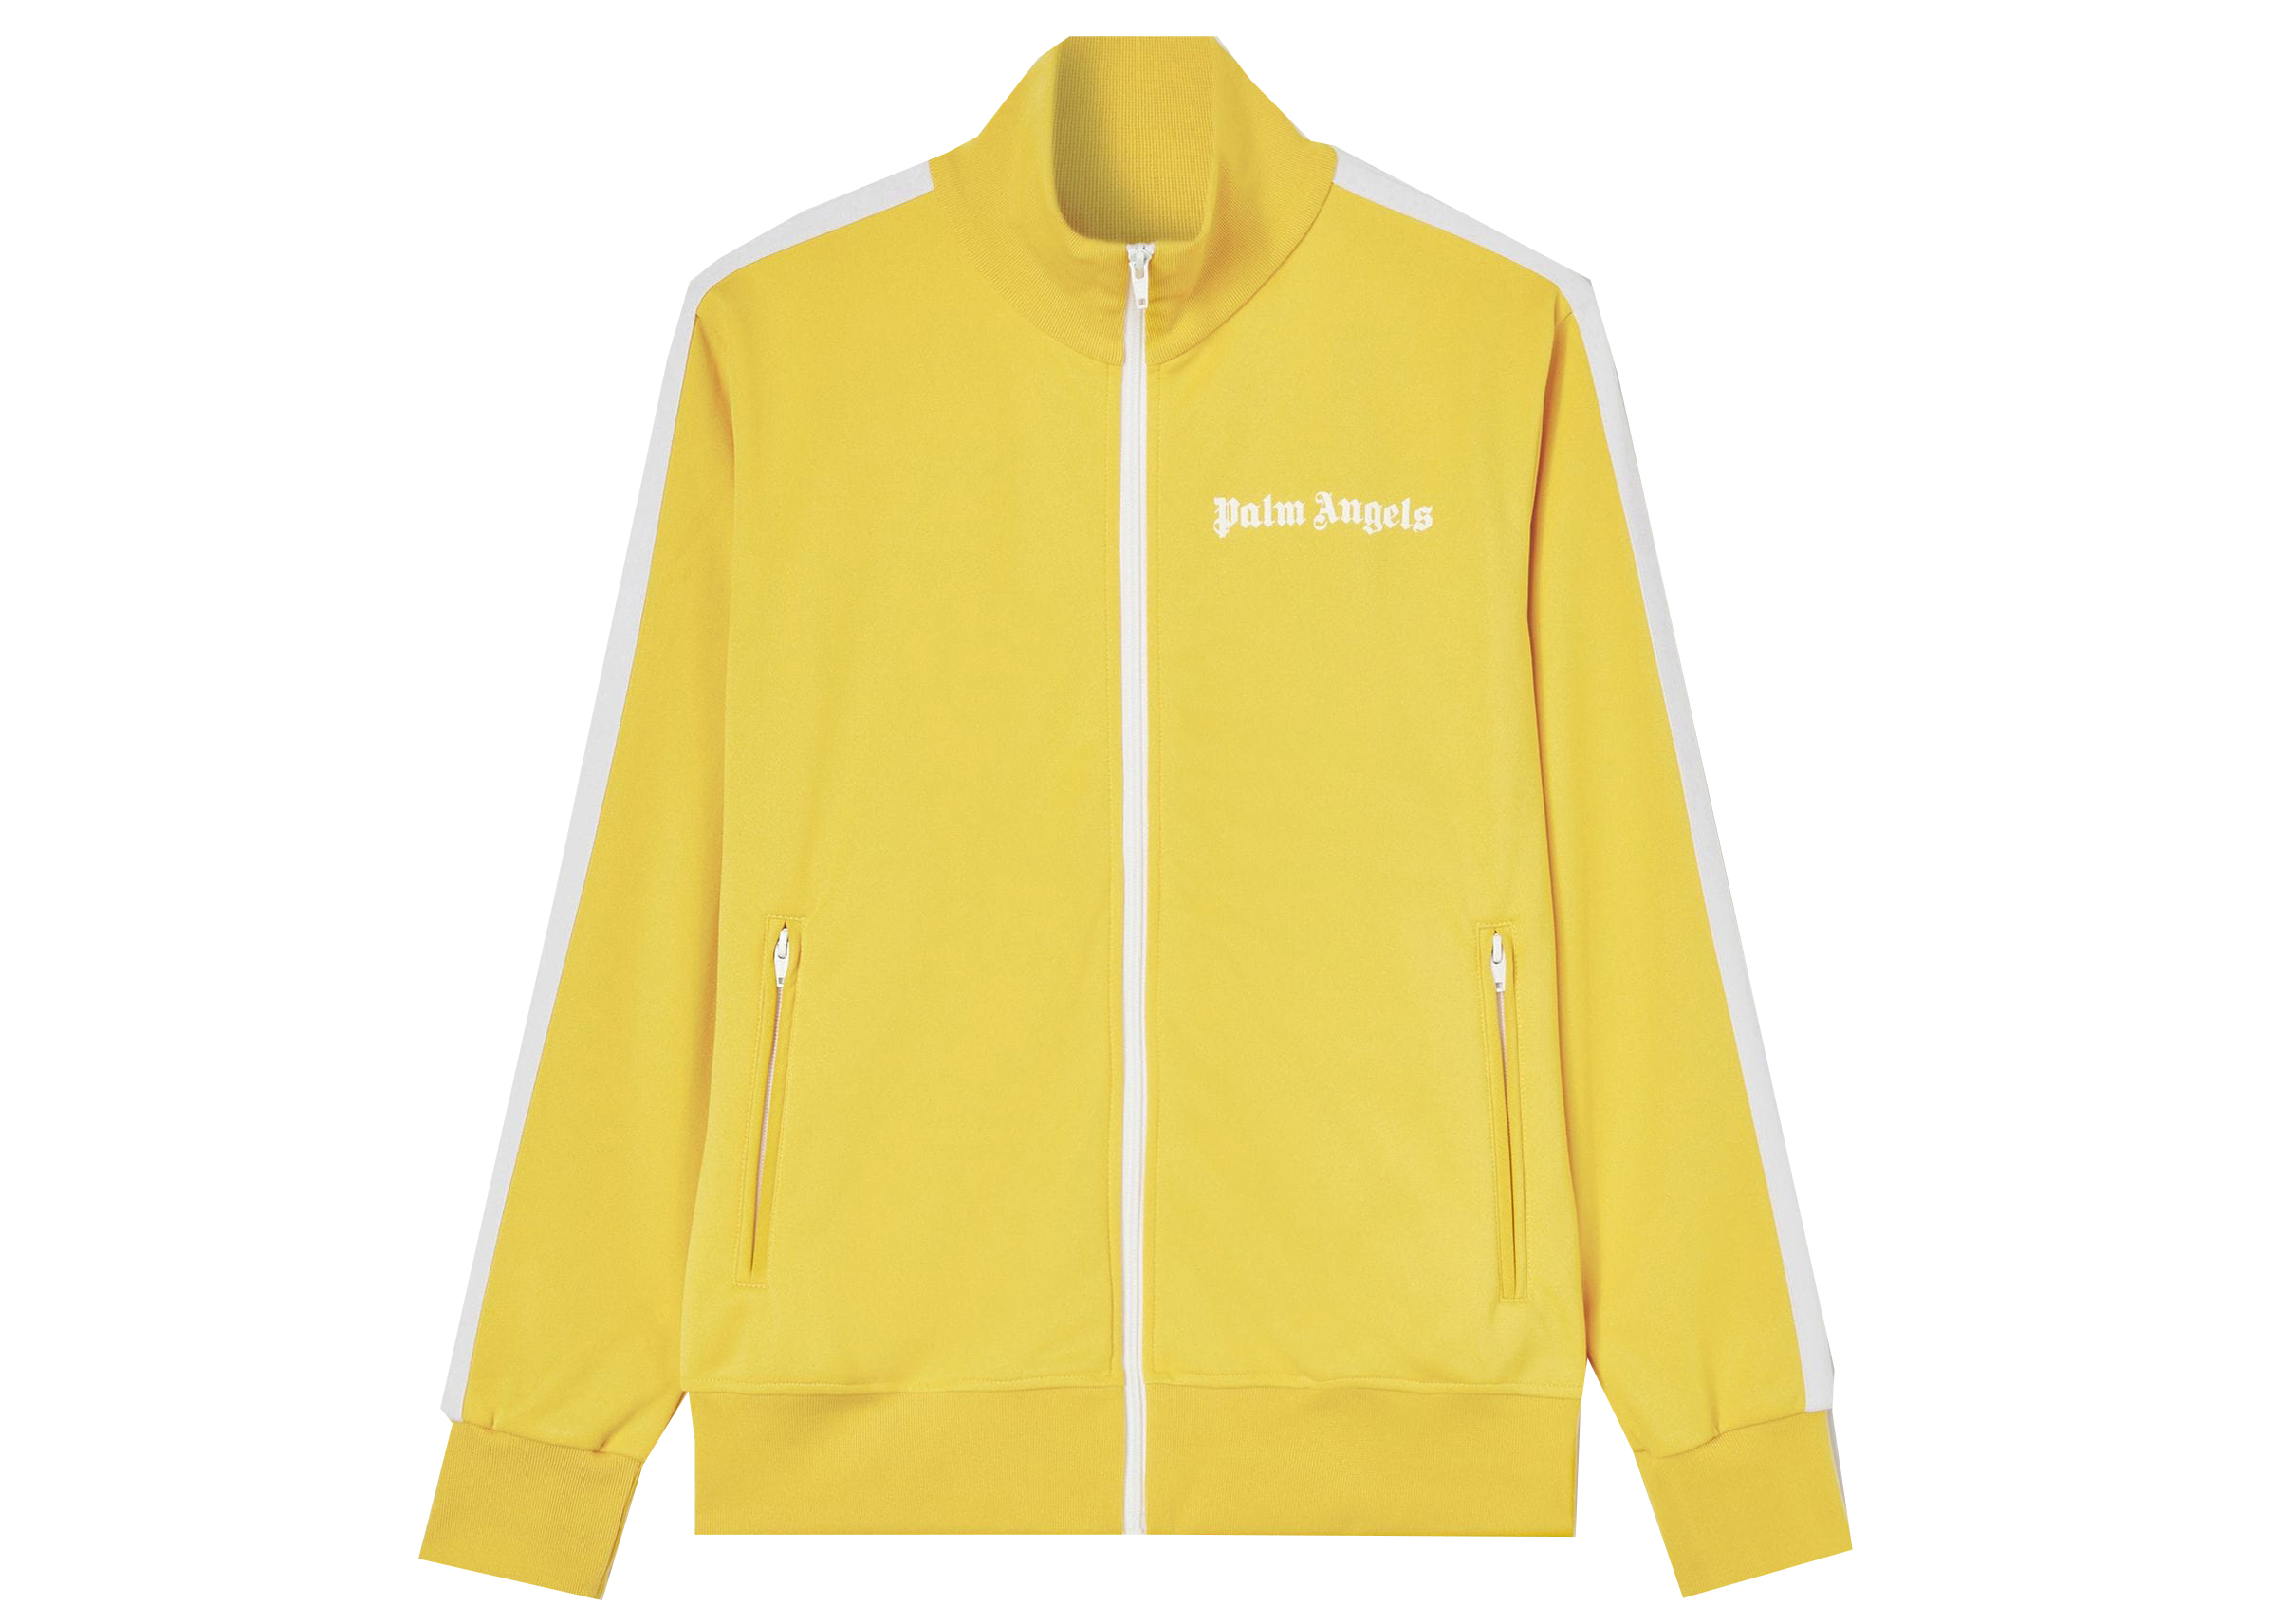 Green Classic Track Jacket by Palm Angels on Sale